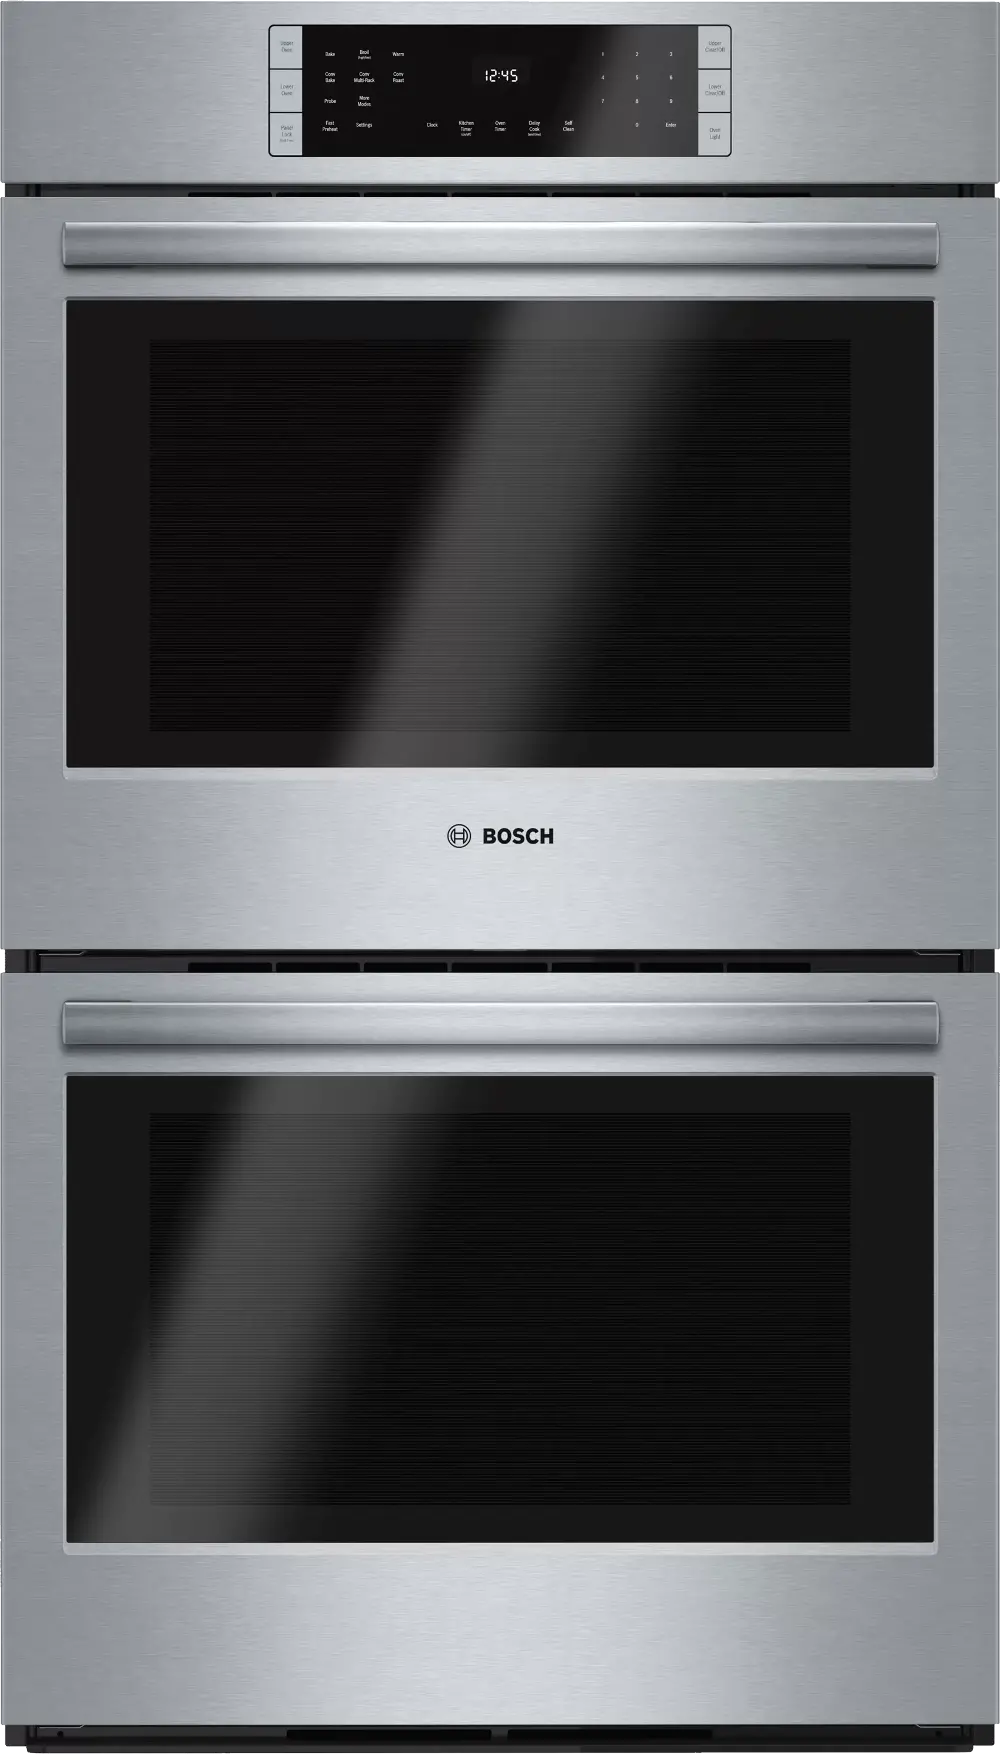 HBL8651UC Bosch 9.2 cu ft Double Wall Oven - Stainless Steel 30 Inch-1